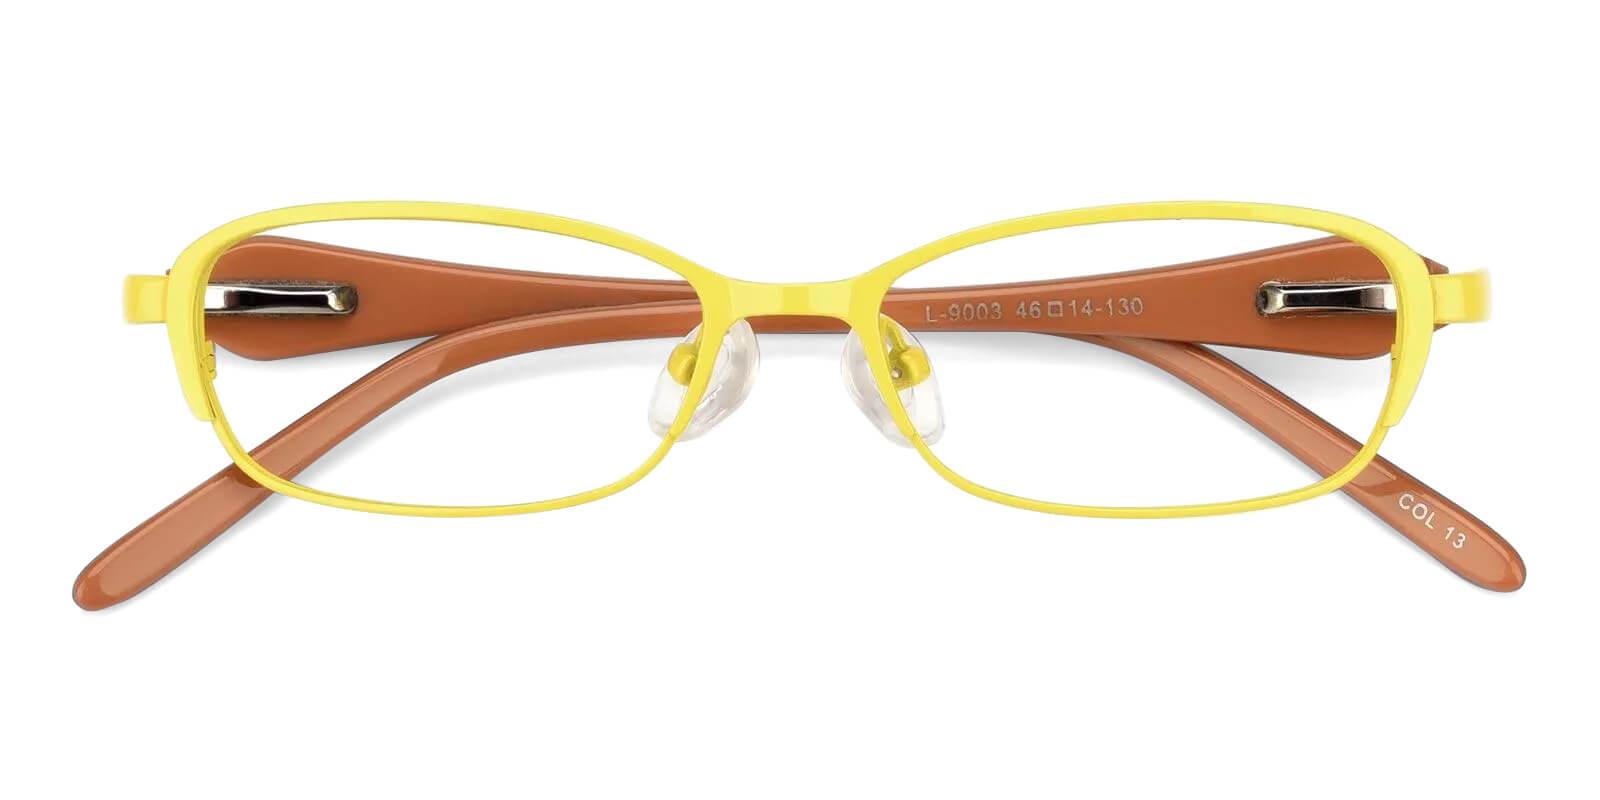 Kids-Volume Yellow Metal Eyeglasses , Fashion , NosePads , SpringHinges Frames from ABBE Glasses